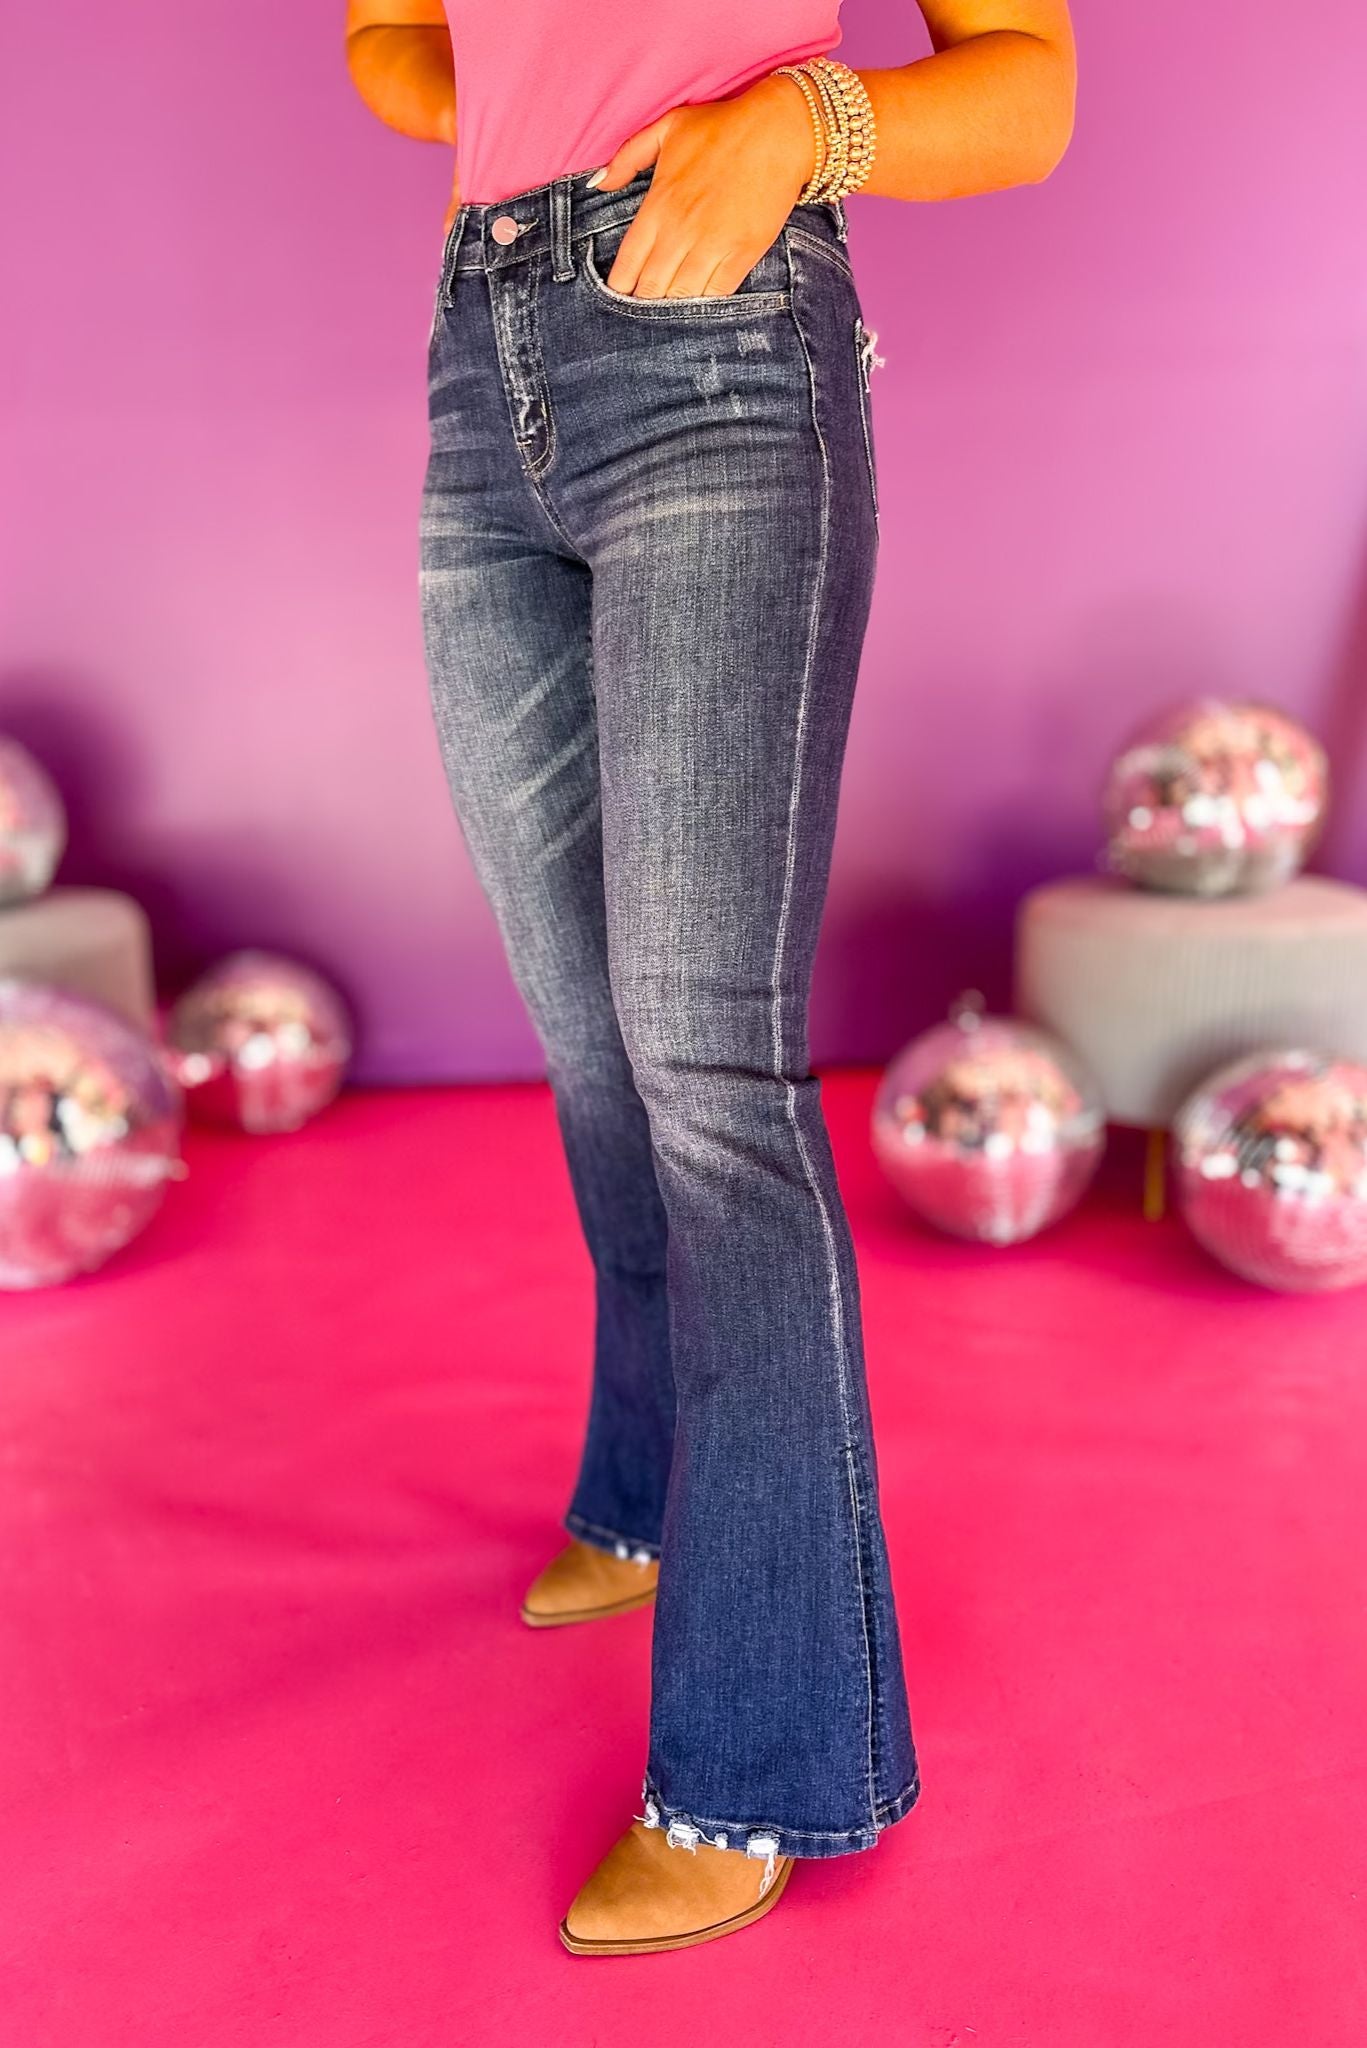 Mica Dark Wash Mid Rise Split Flare Jeans, flare jeans, stylish jeans, must have jeans, must have style, must have comfortable style, spring fashion, spring style, street style, mom style, elevated comfortable, elevated style, shop style your senses by mallory fitzsimmons